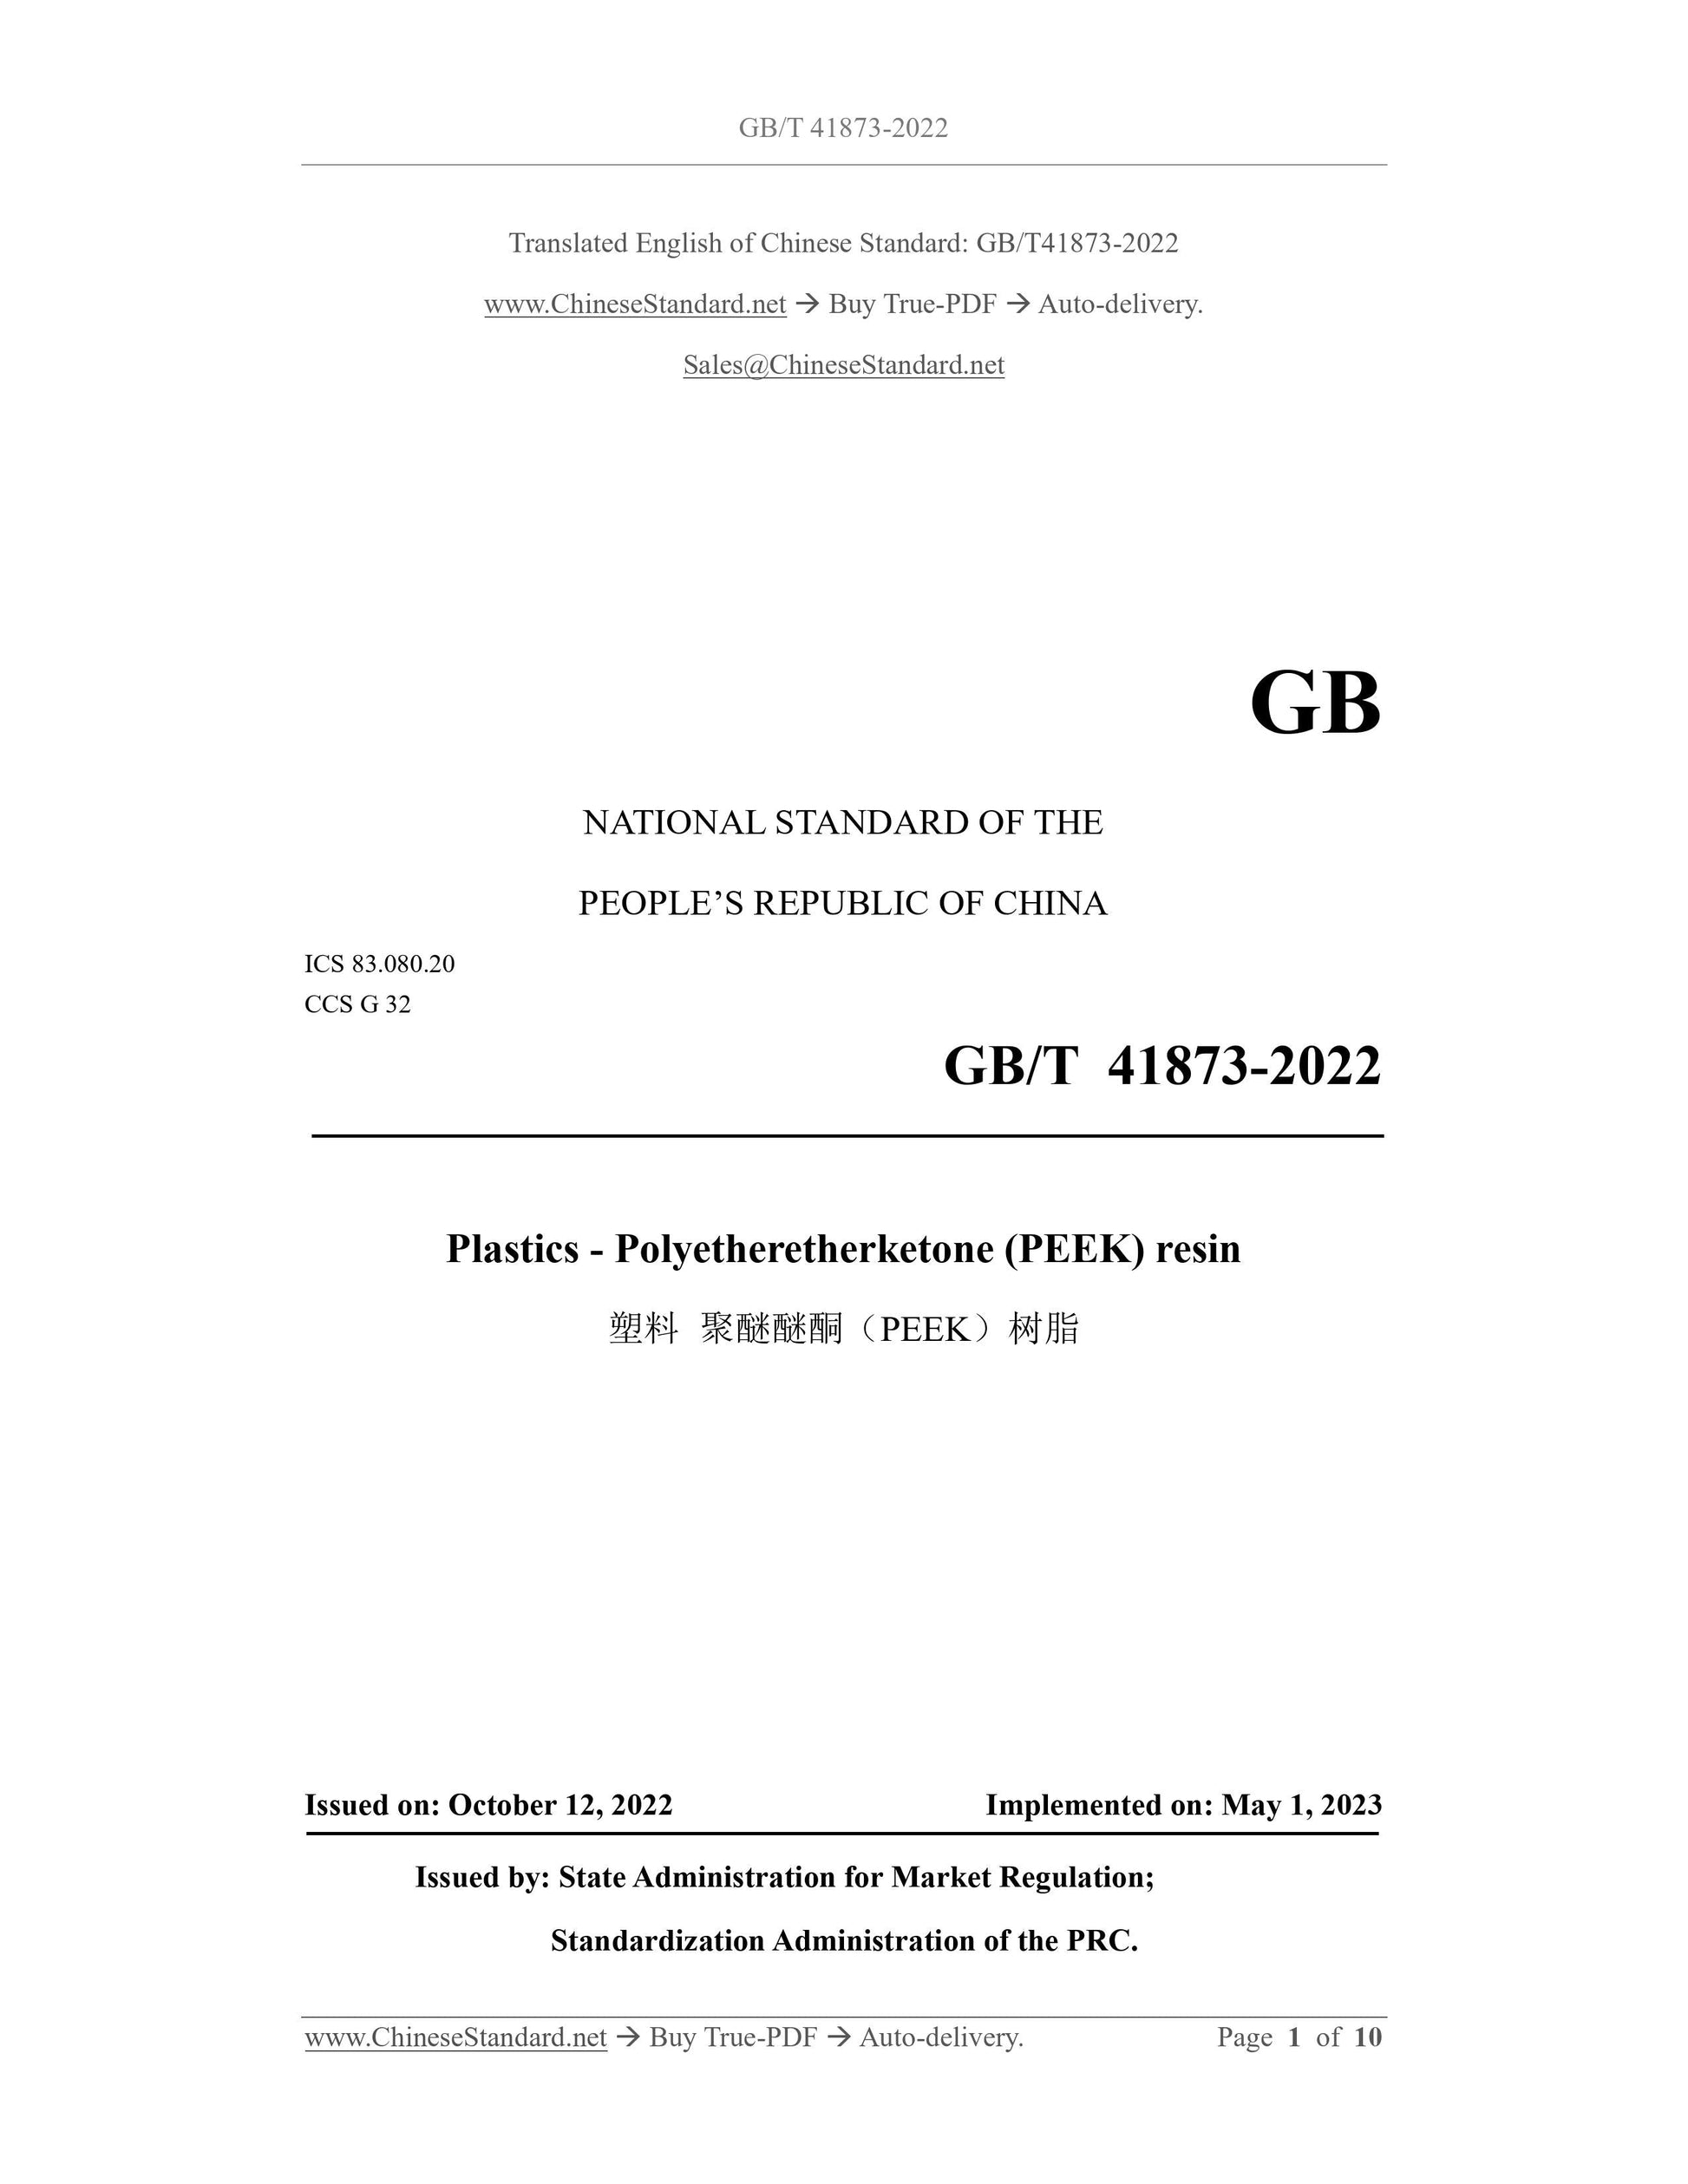 GB/T 41873-2022 Page 1